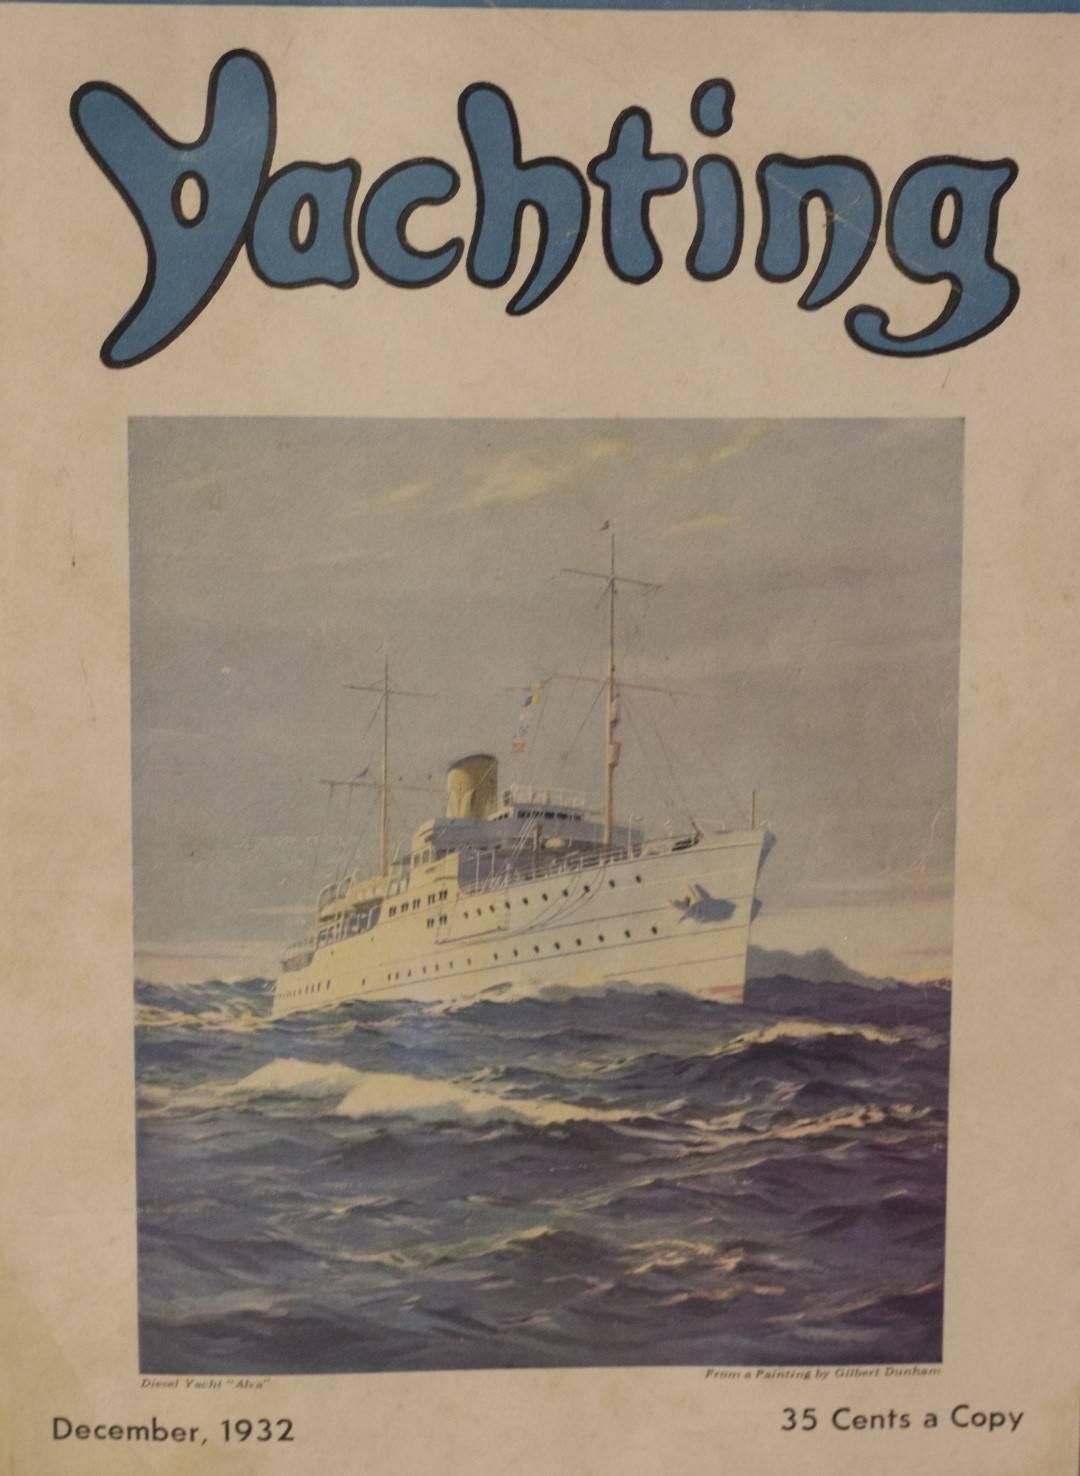 Authentic cover from Yachting Magazine, December 1932 issue. Showing diesel yacht Alva (a Vanderbilt yacht), from a painting by Gilbert Dunham. Matted and framed. Dimensions: 17